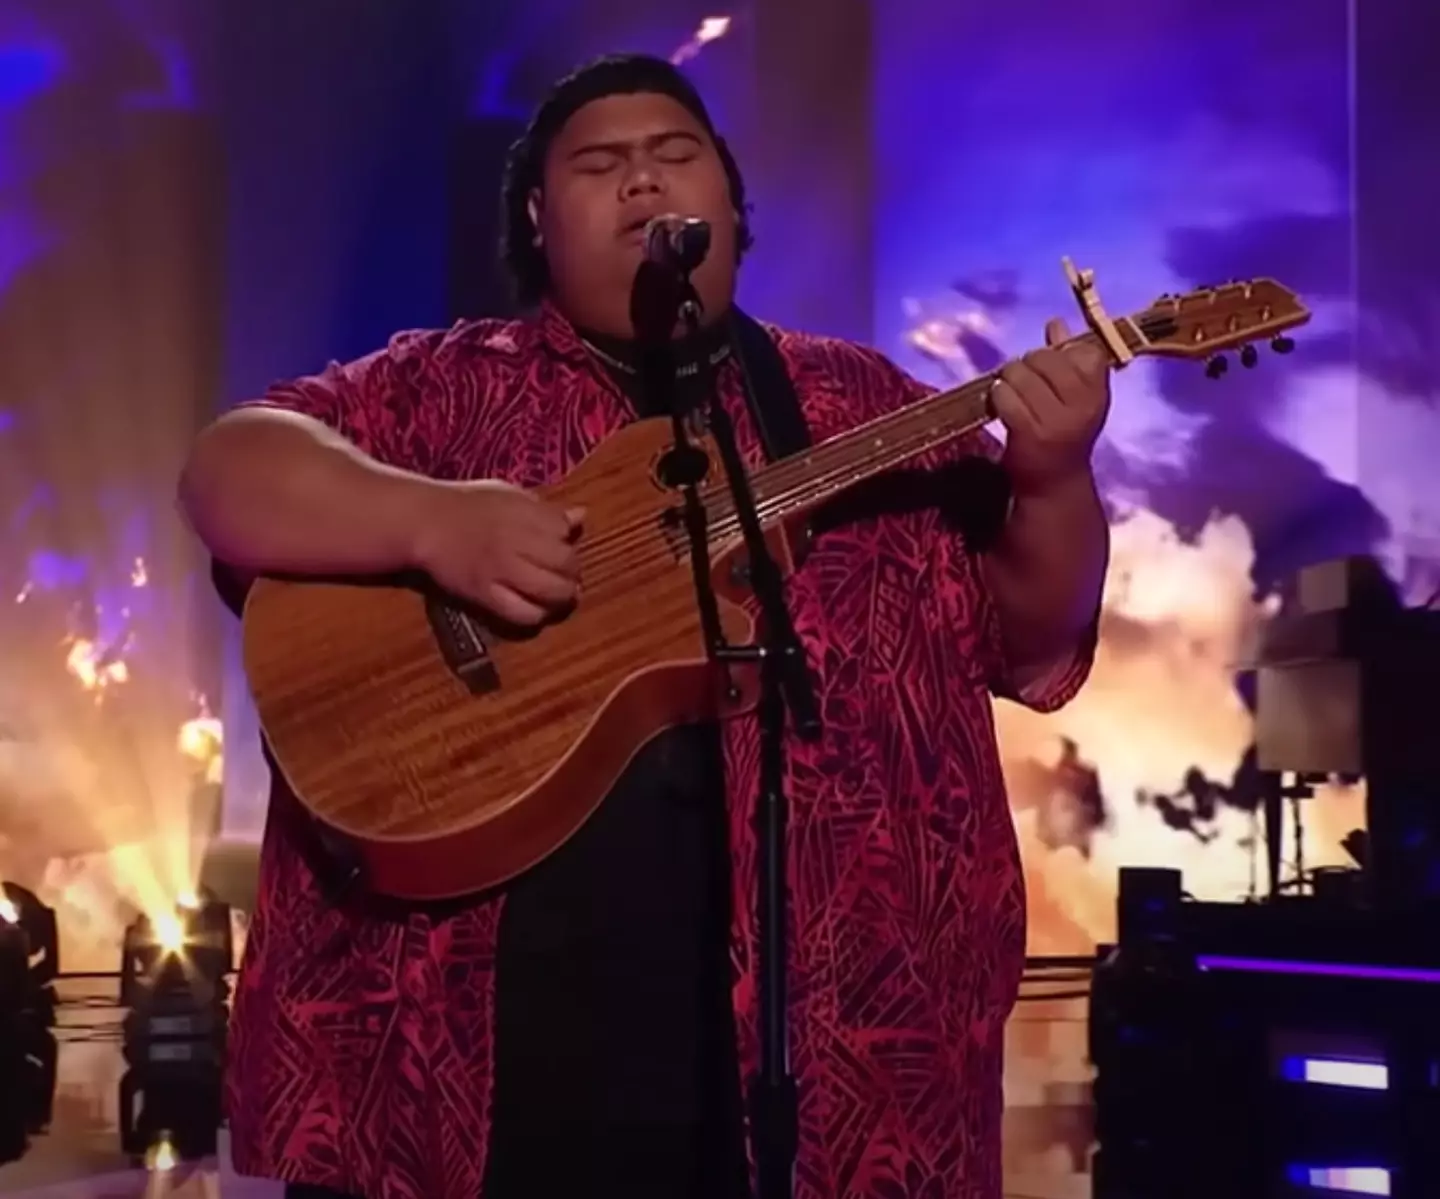 Iam Tongi became the youngest winner of American Idol.